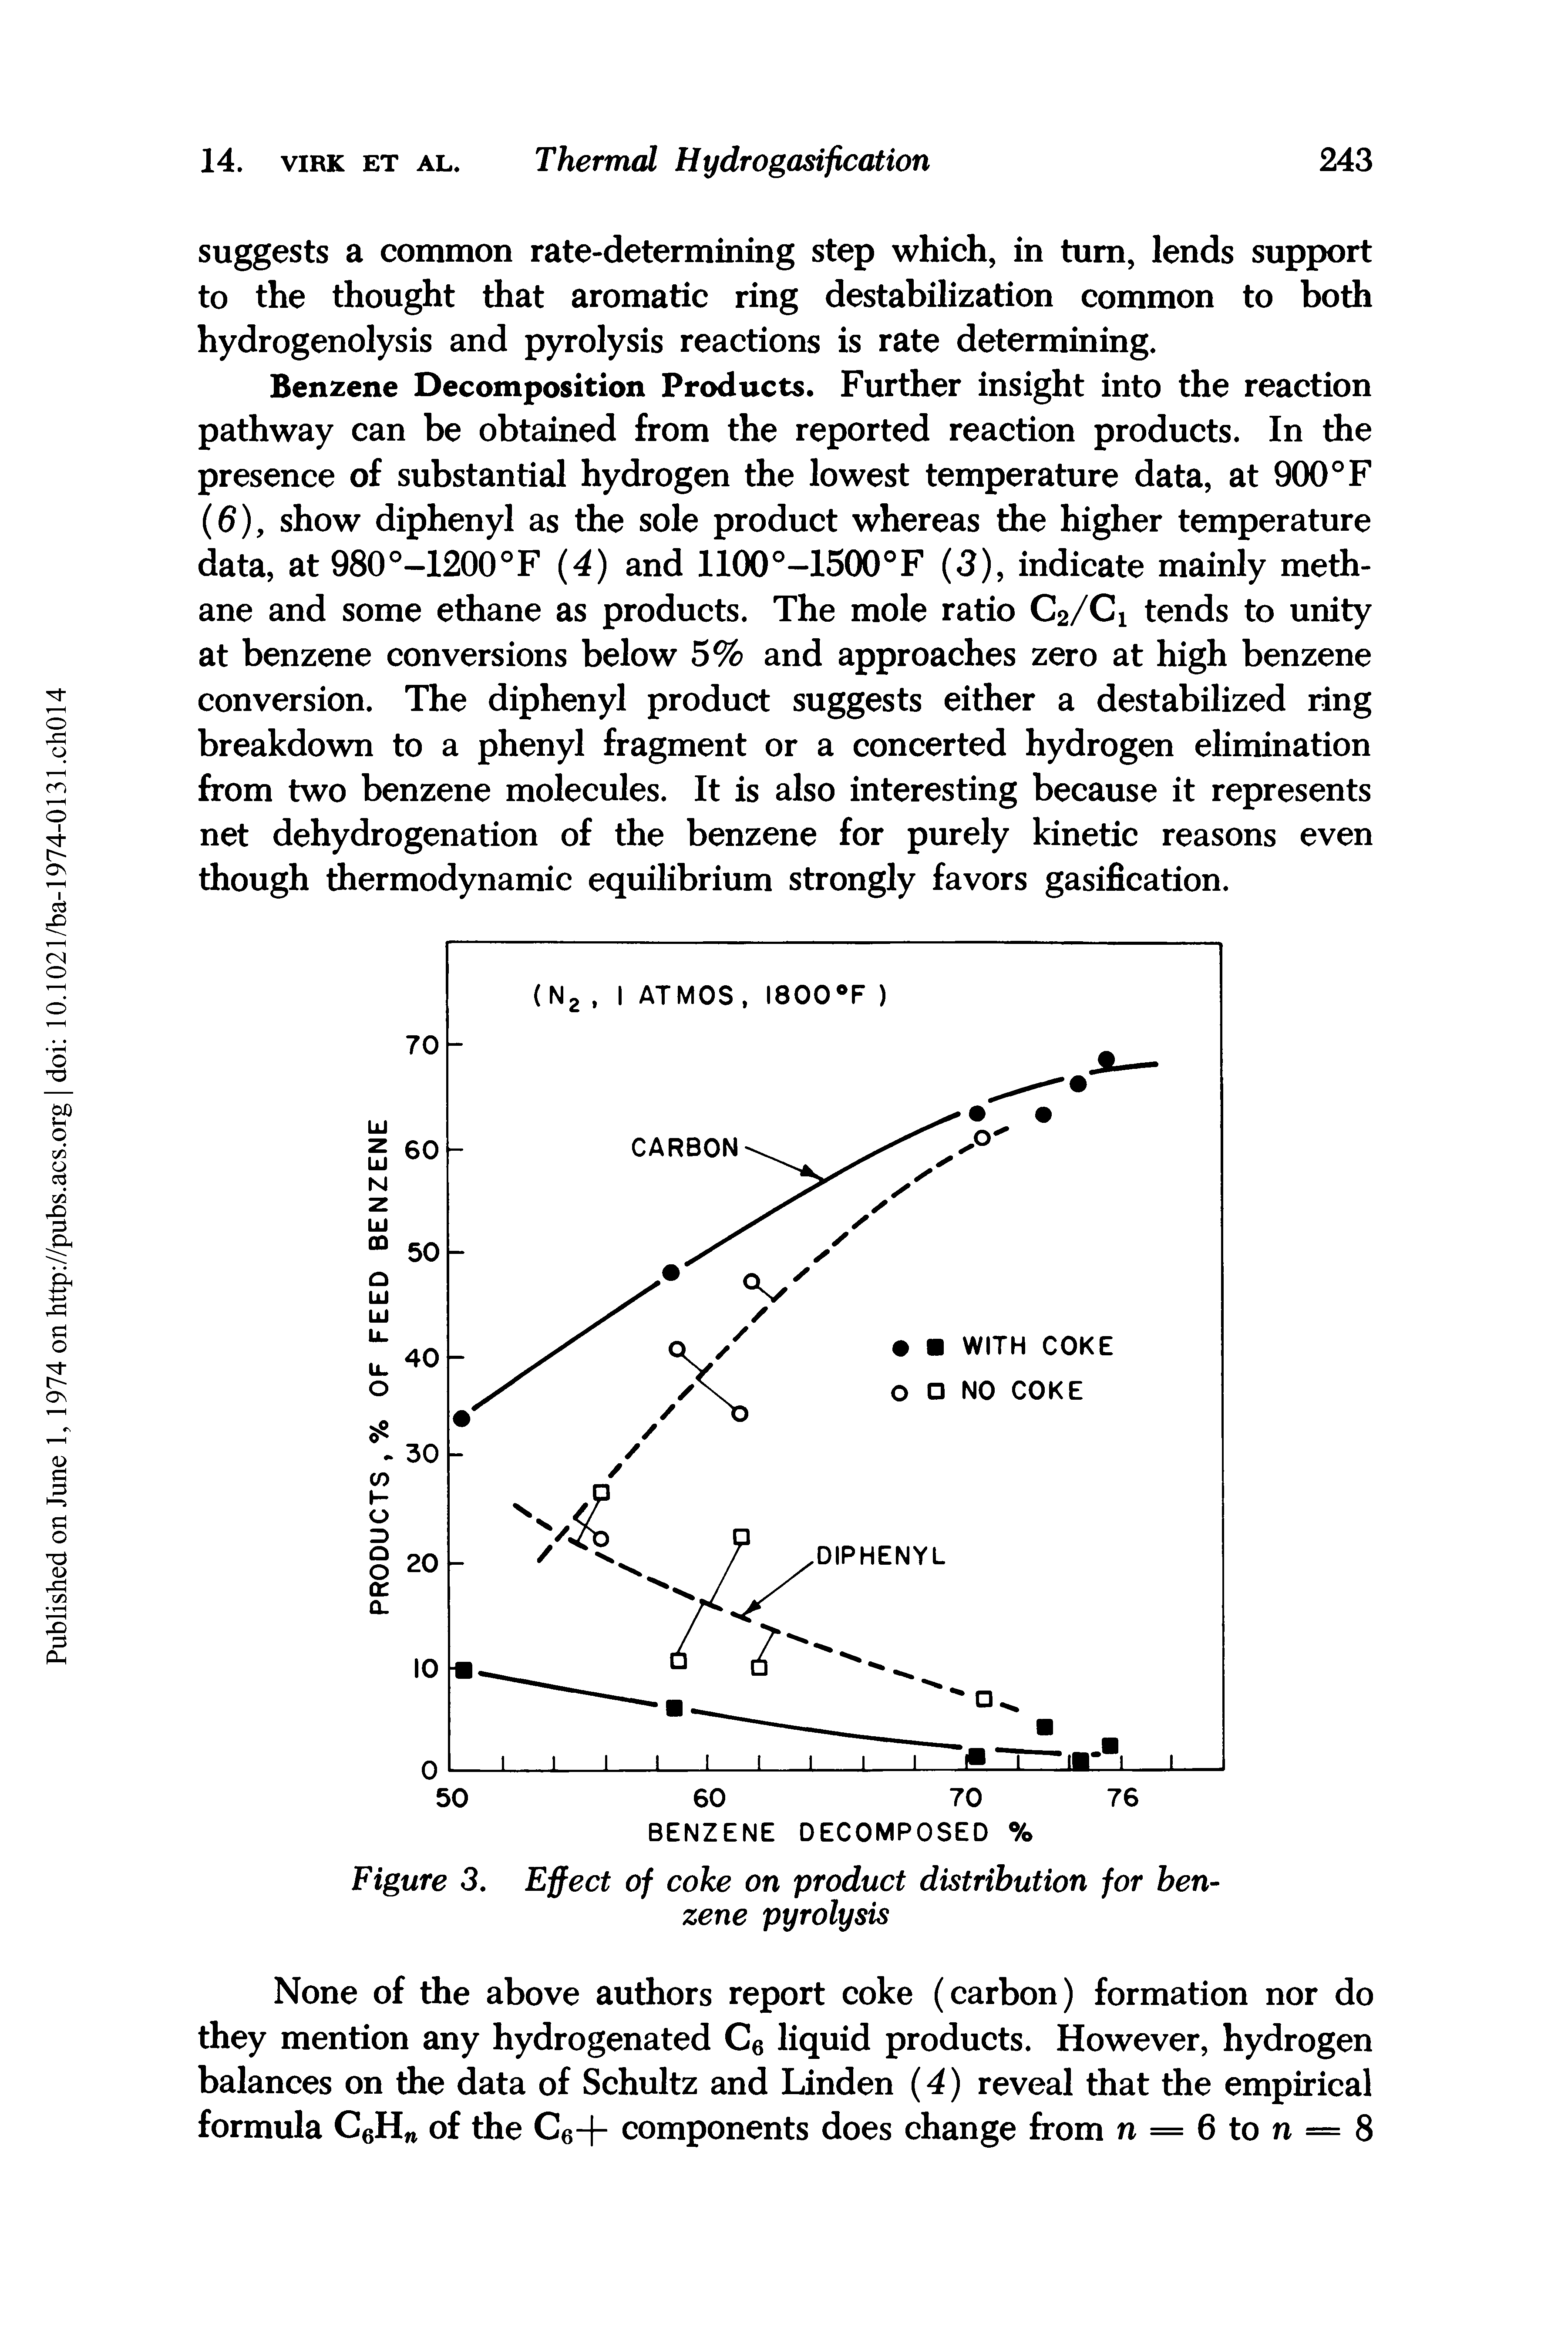 Figure 3. Effect of coke on product distribution for benzene pyrolysis...